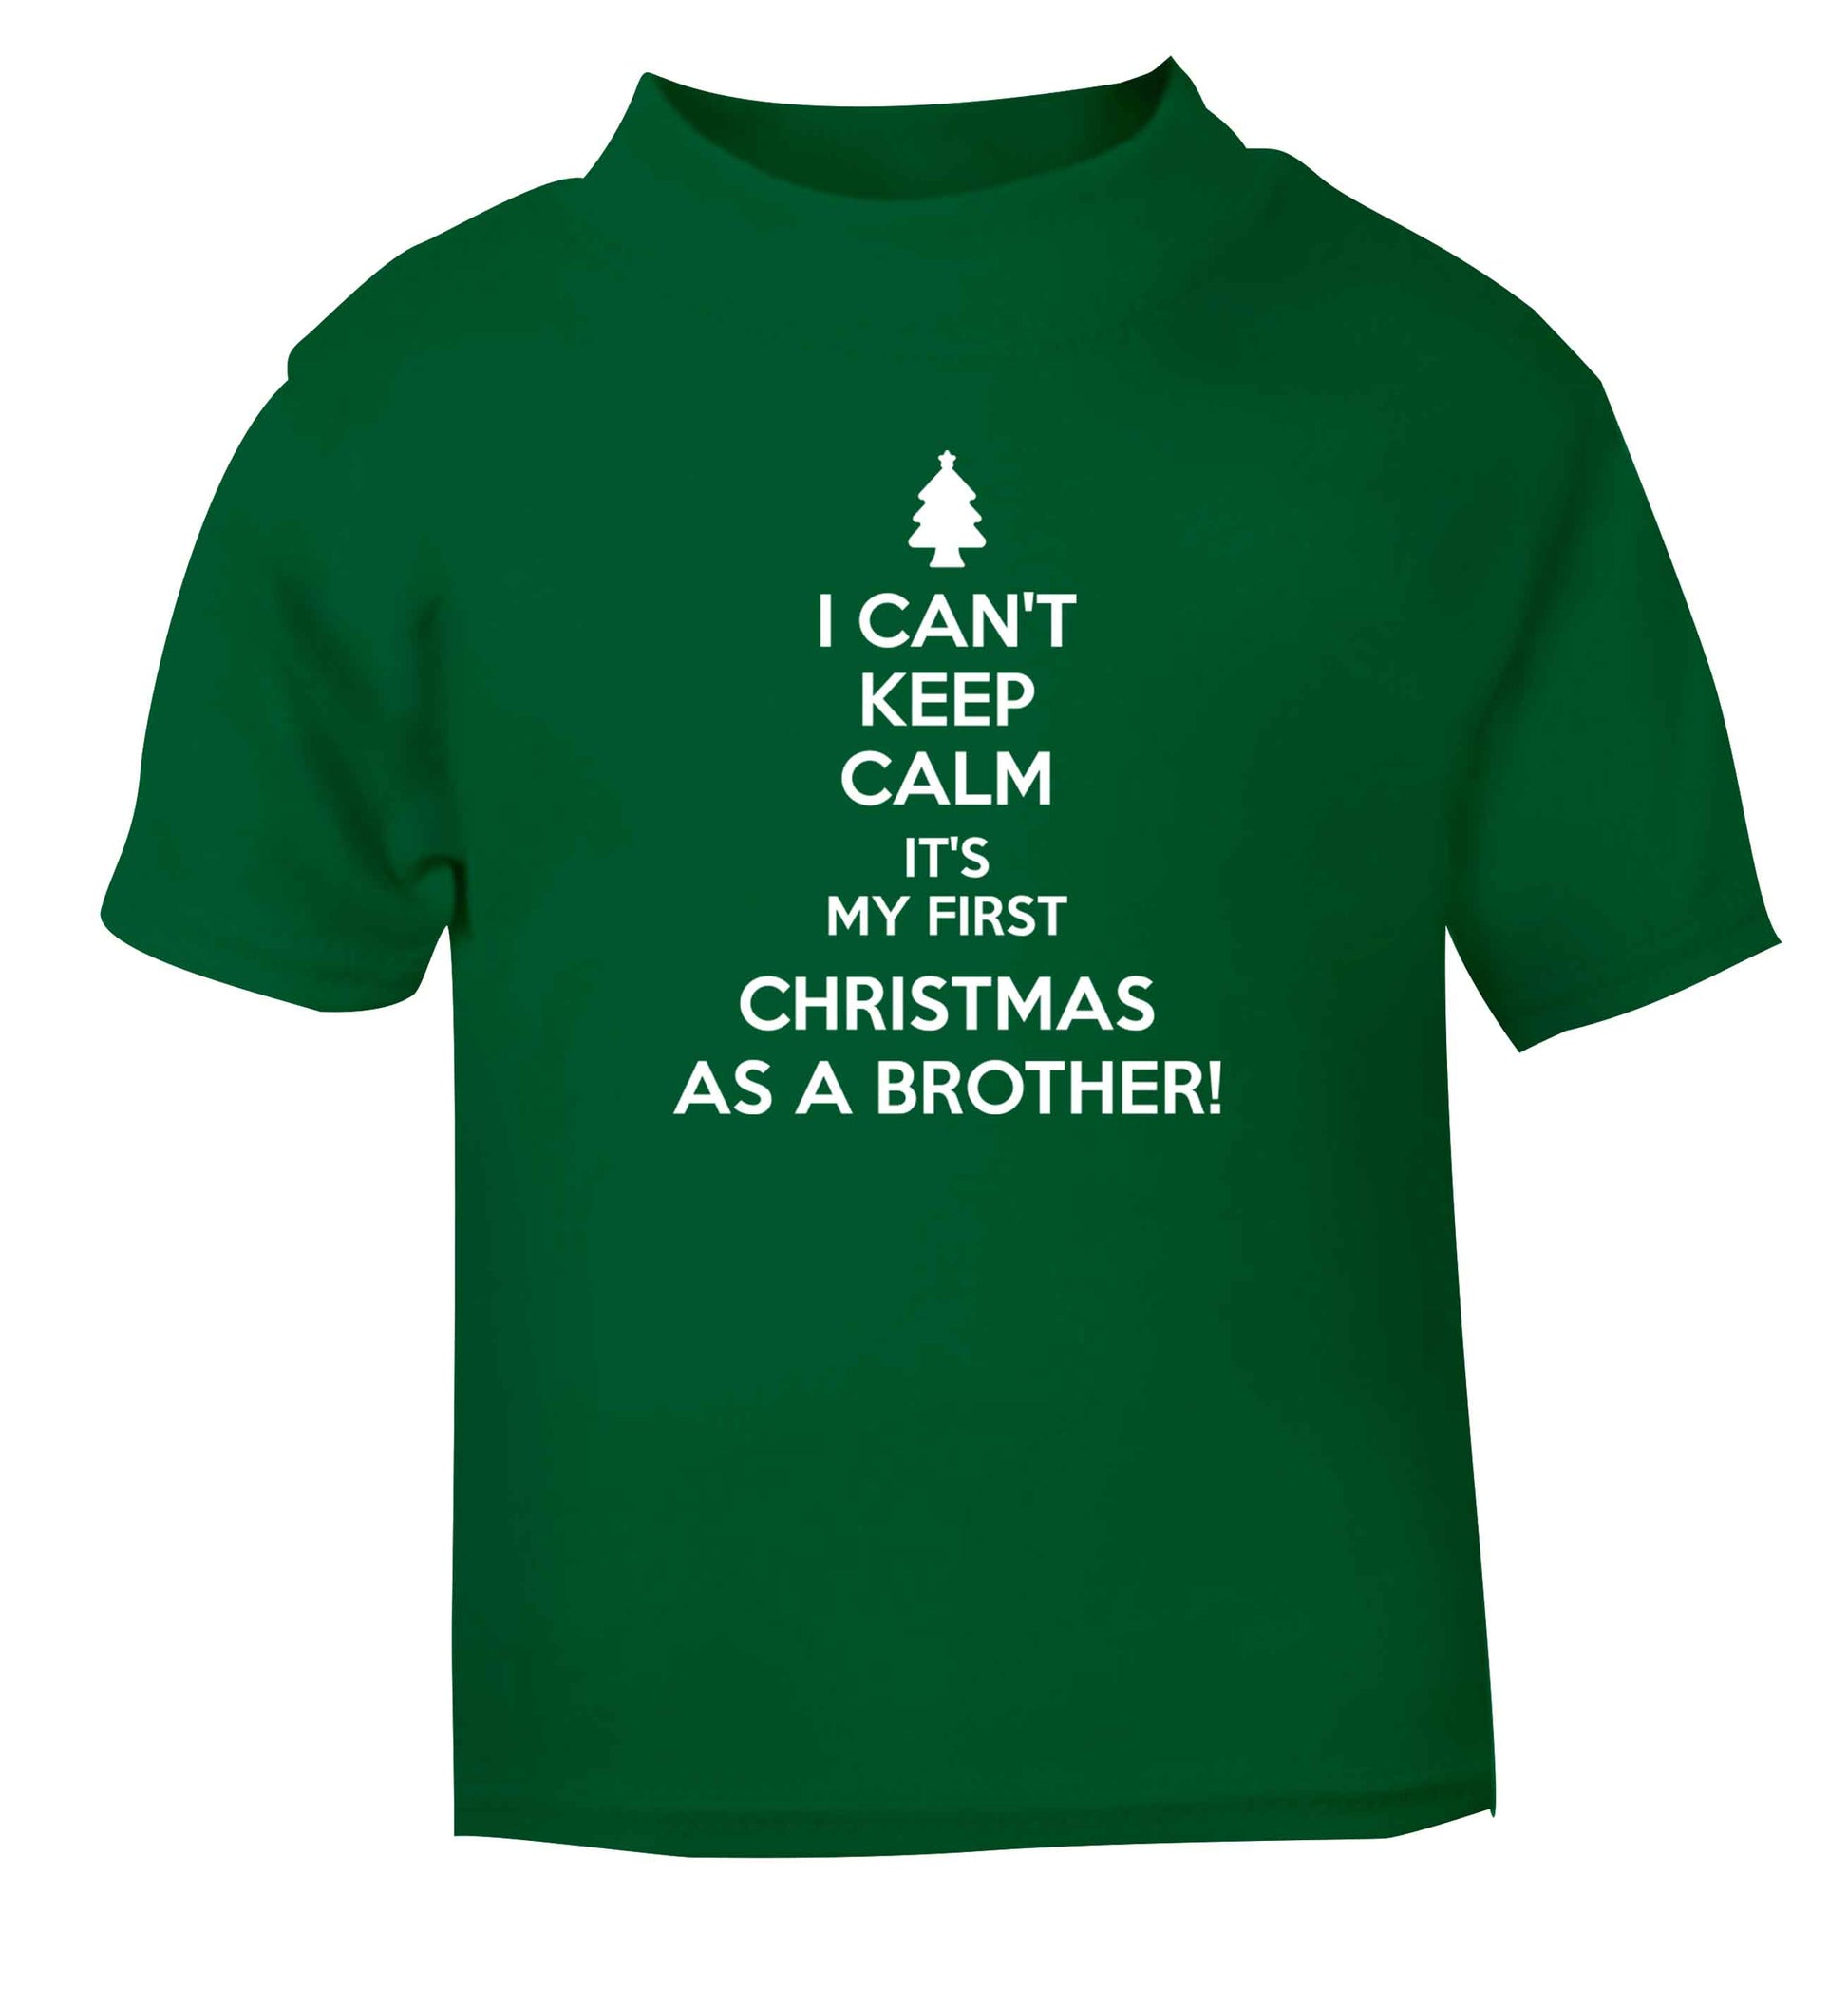 I can't keep calm it's my first Christmas as a brother! green Baby Toddler Tshirt 2 Years